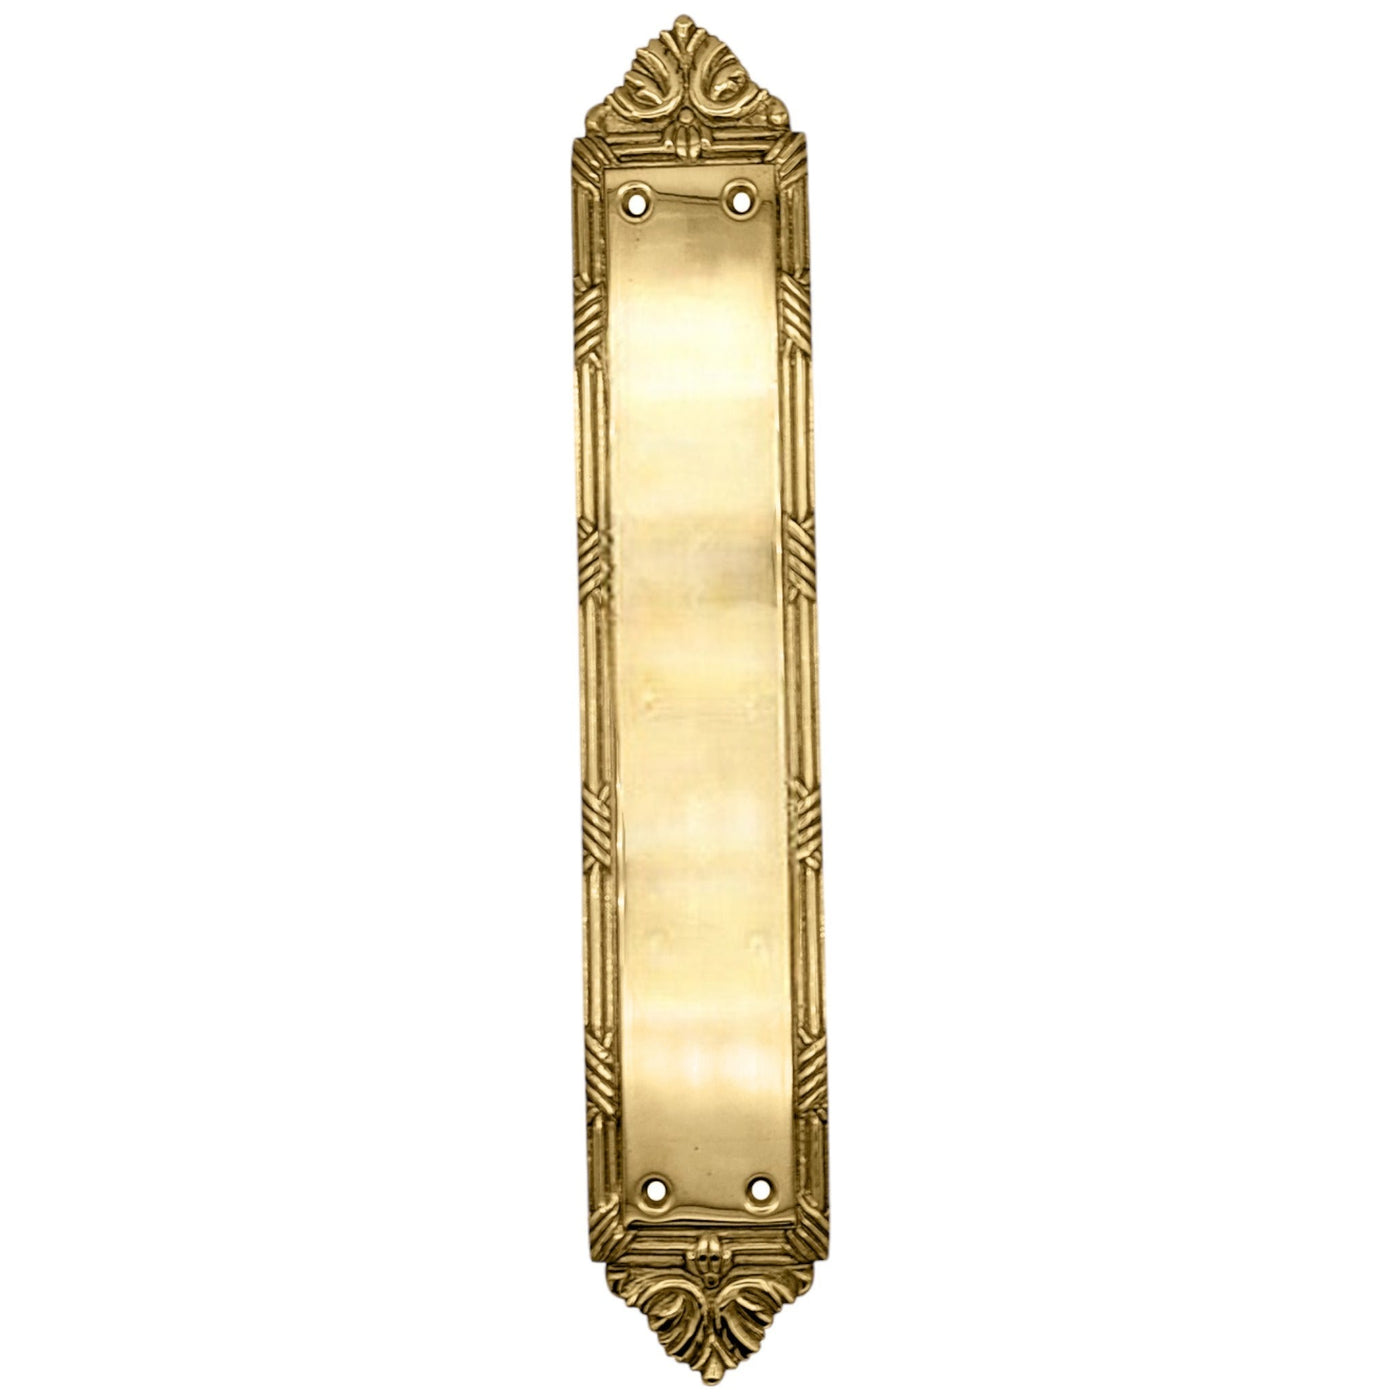 13 3/4 Inch Solid Brass Ribbon & Reed Push Plate